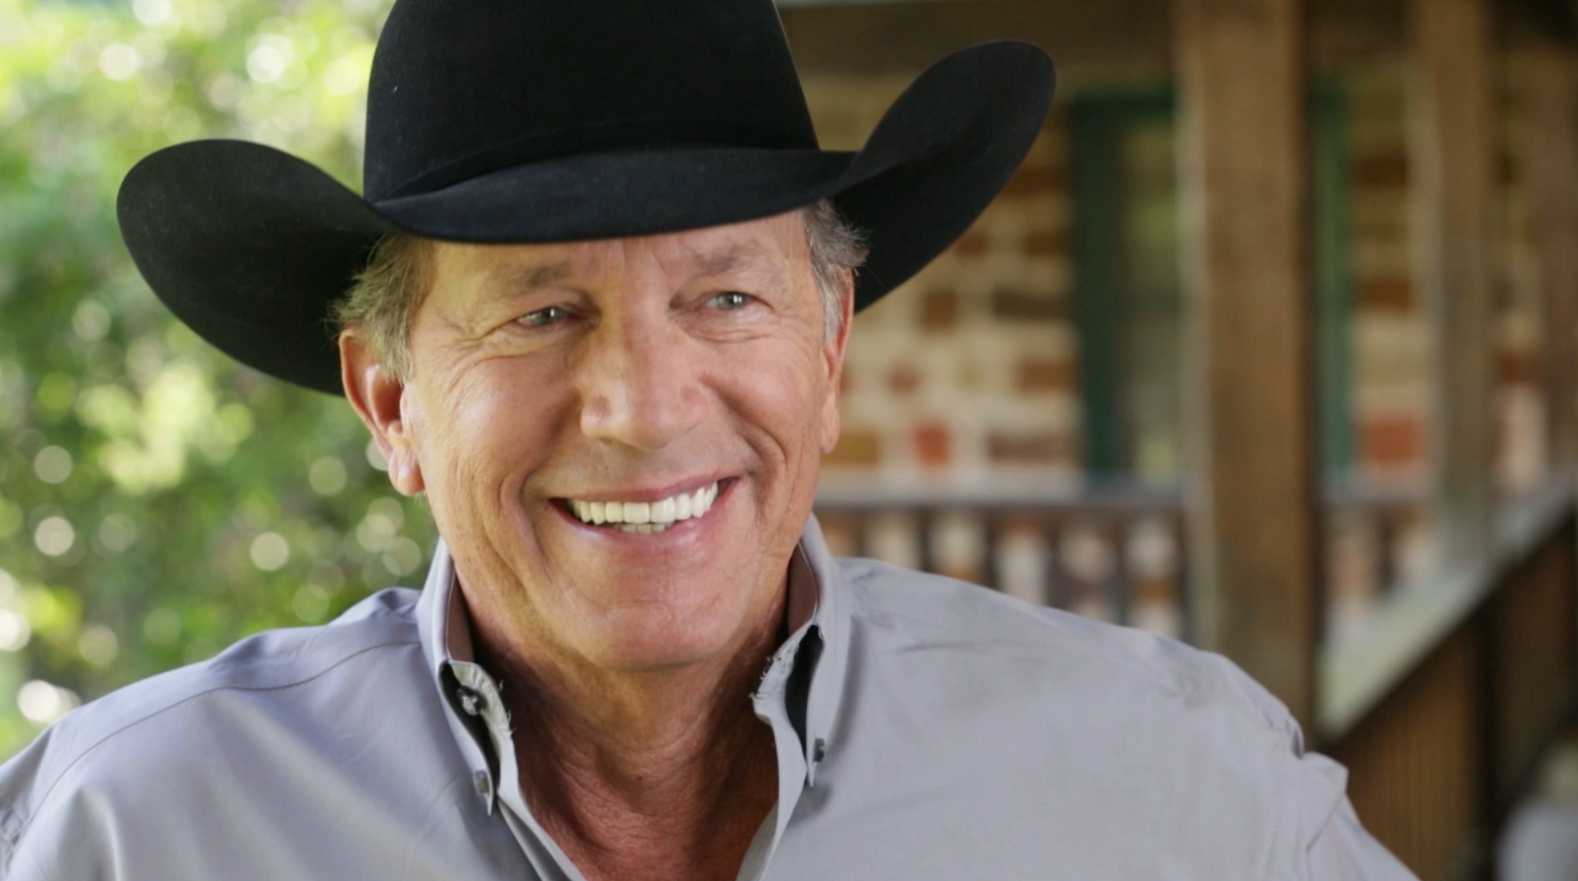 kens5.com | George Strait honored as 'Texan of the Year'1578 x 881